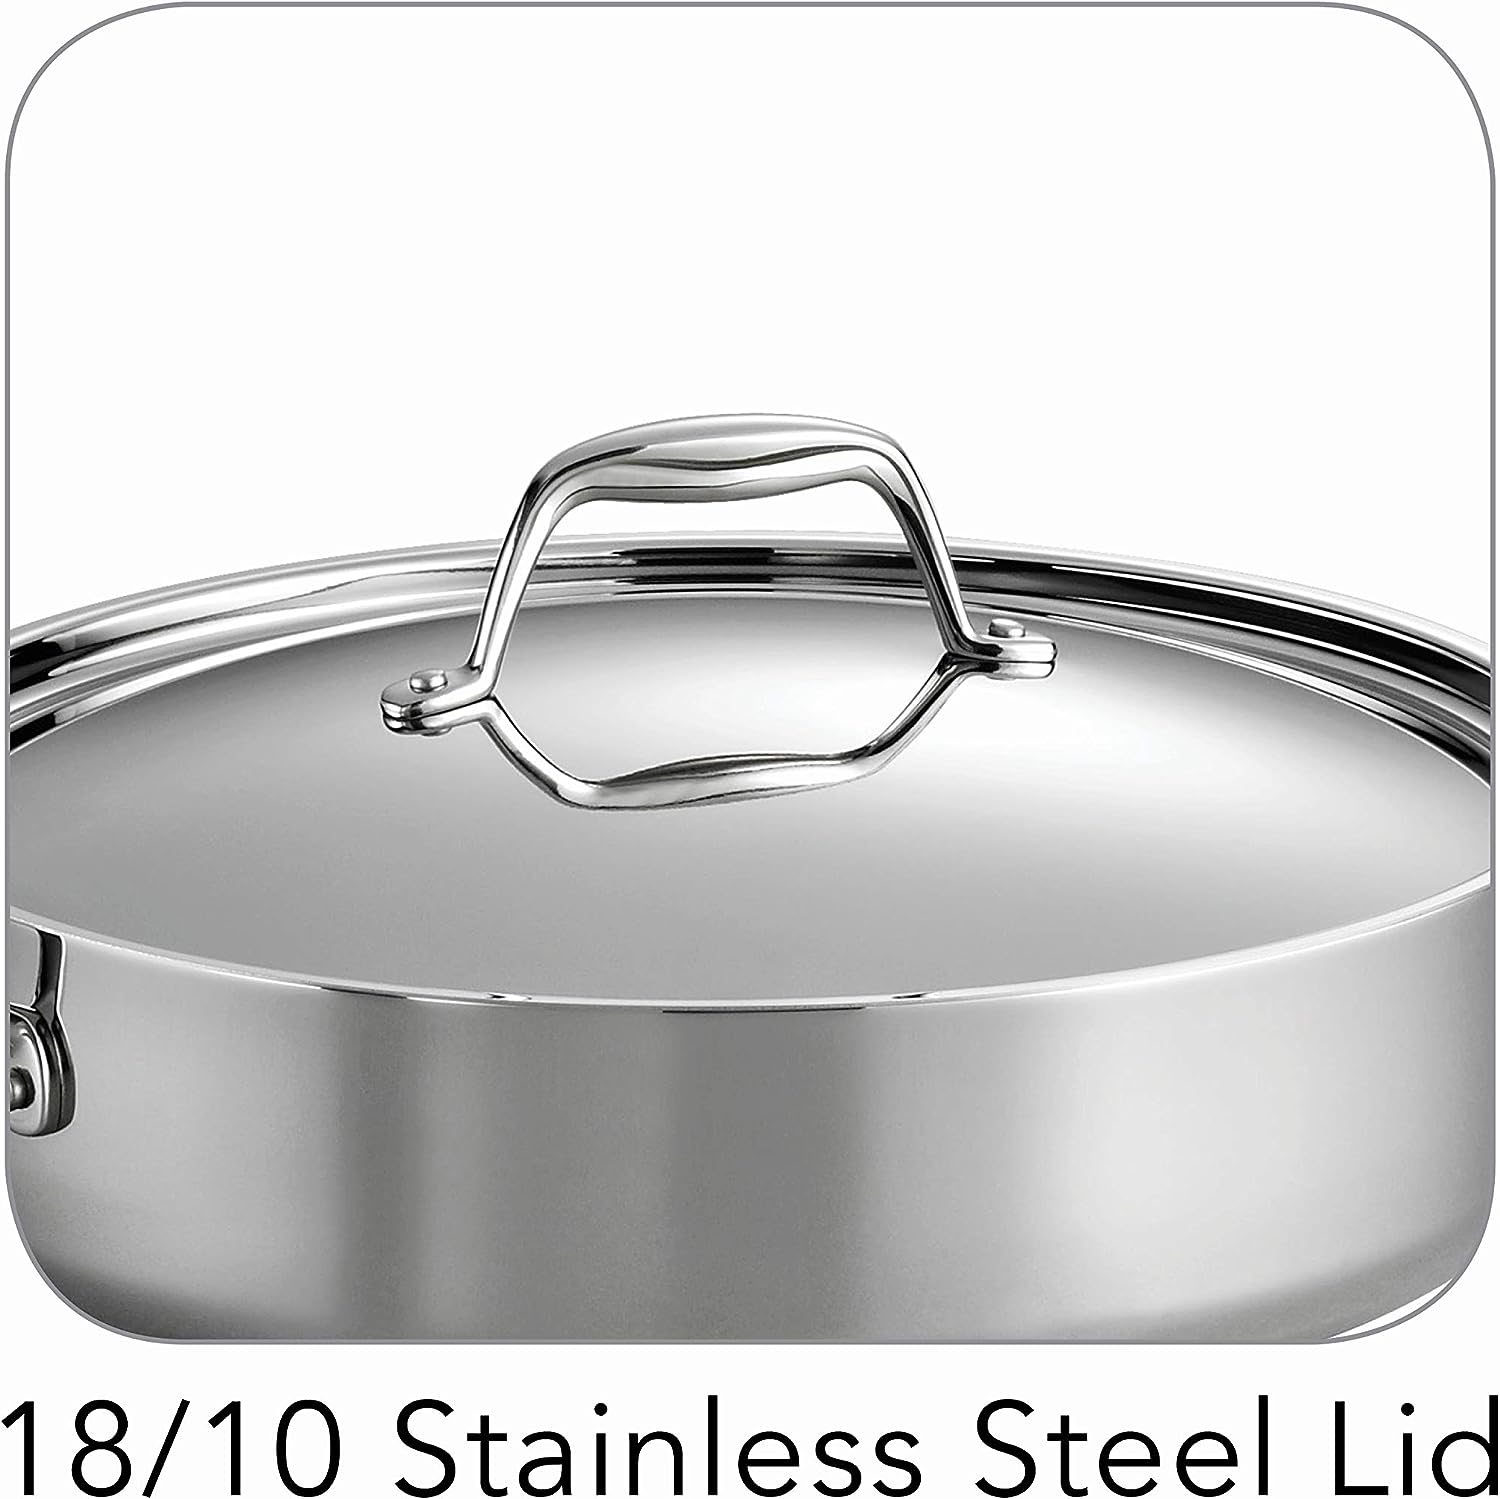 Tramontina Covered Deep Saute Pan Stainless Steel Tri-Ply Clad 6 Qt, 80116/073DS